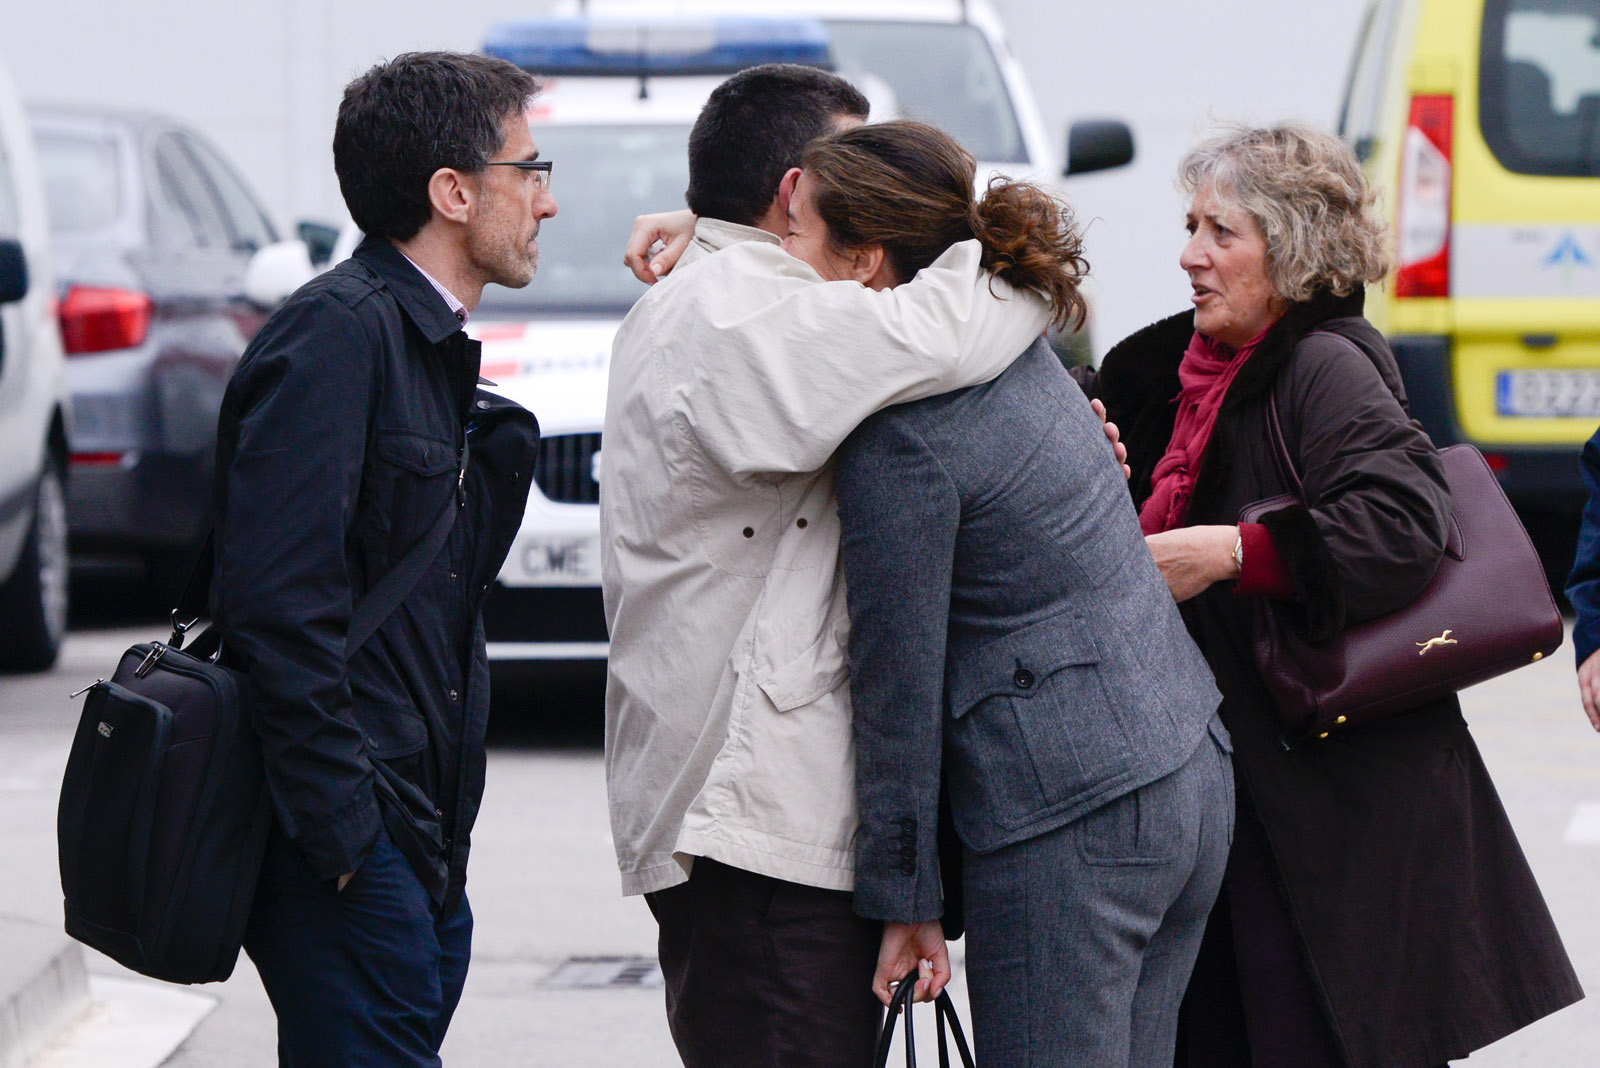 BARCELONA, SPAIN- MARCH 24:  Relatives of passangers of the Germanwings plane crashed in French Alps arrive at the Terminal 2 of the Barcelona El Prat airport on March 24, 2015 in Barcelona, Spain. A Germanwings Airbus A320 airliner with 148 people on board has crashed in French Alps.  (Photo by David Ramos/Getty Images)